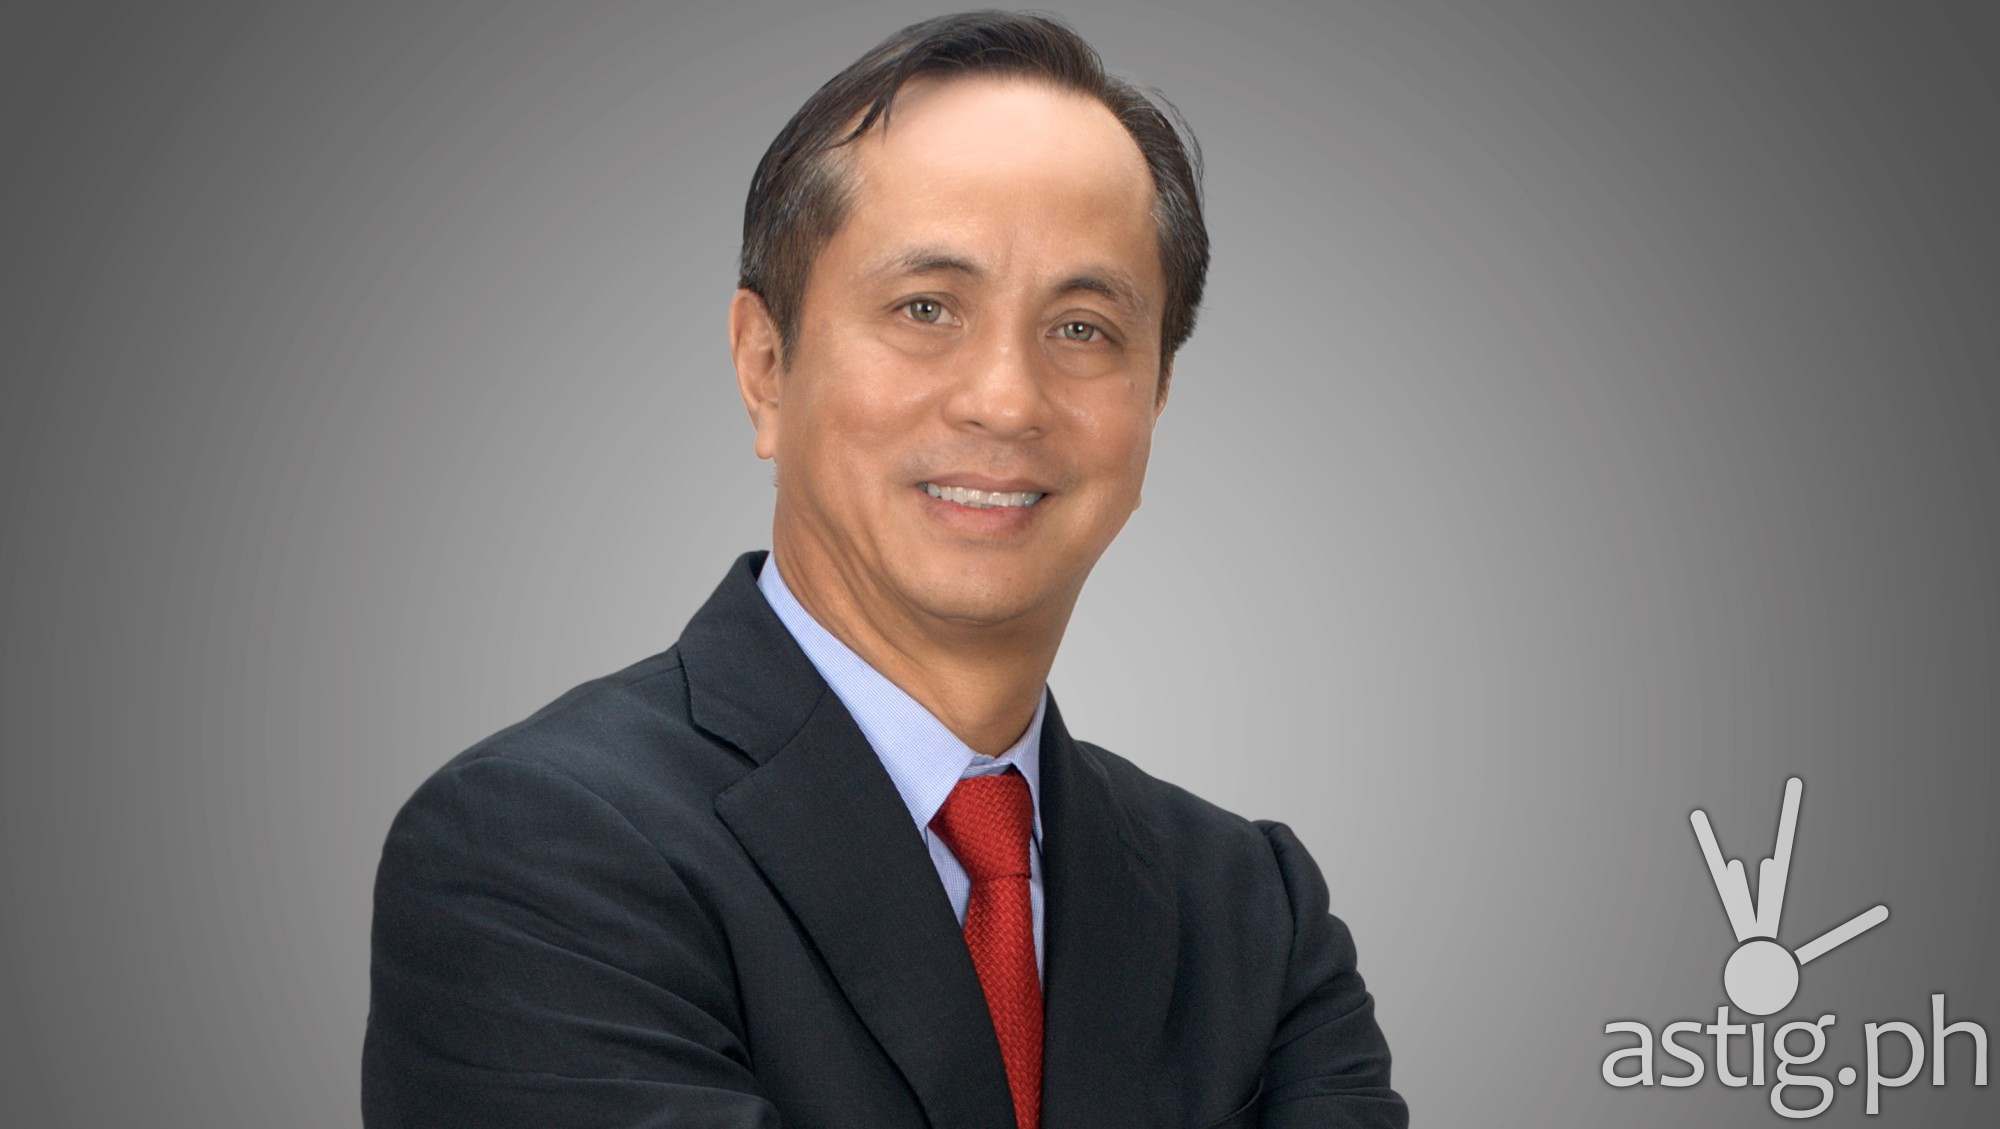 ABS-CBN CEO and Chairman Eugenio Lopez III